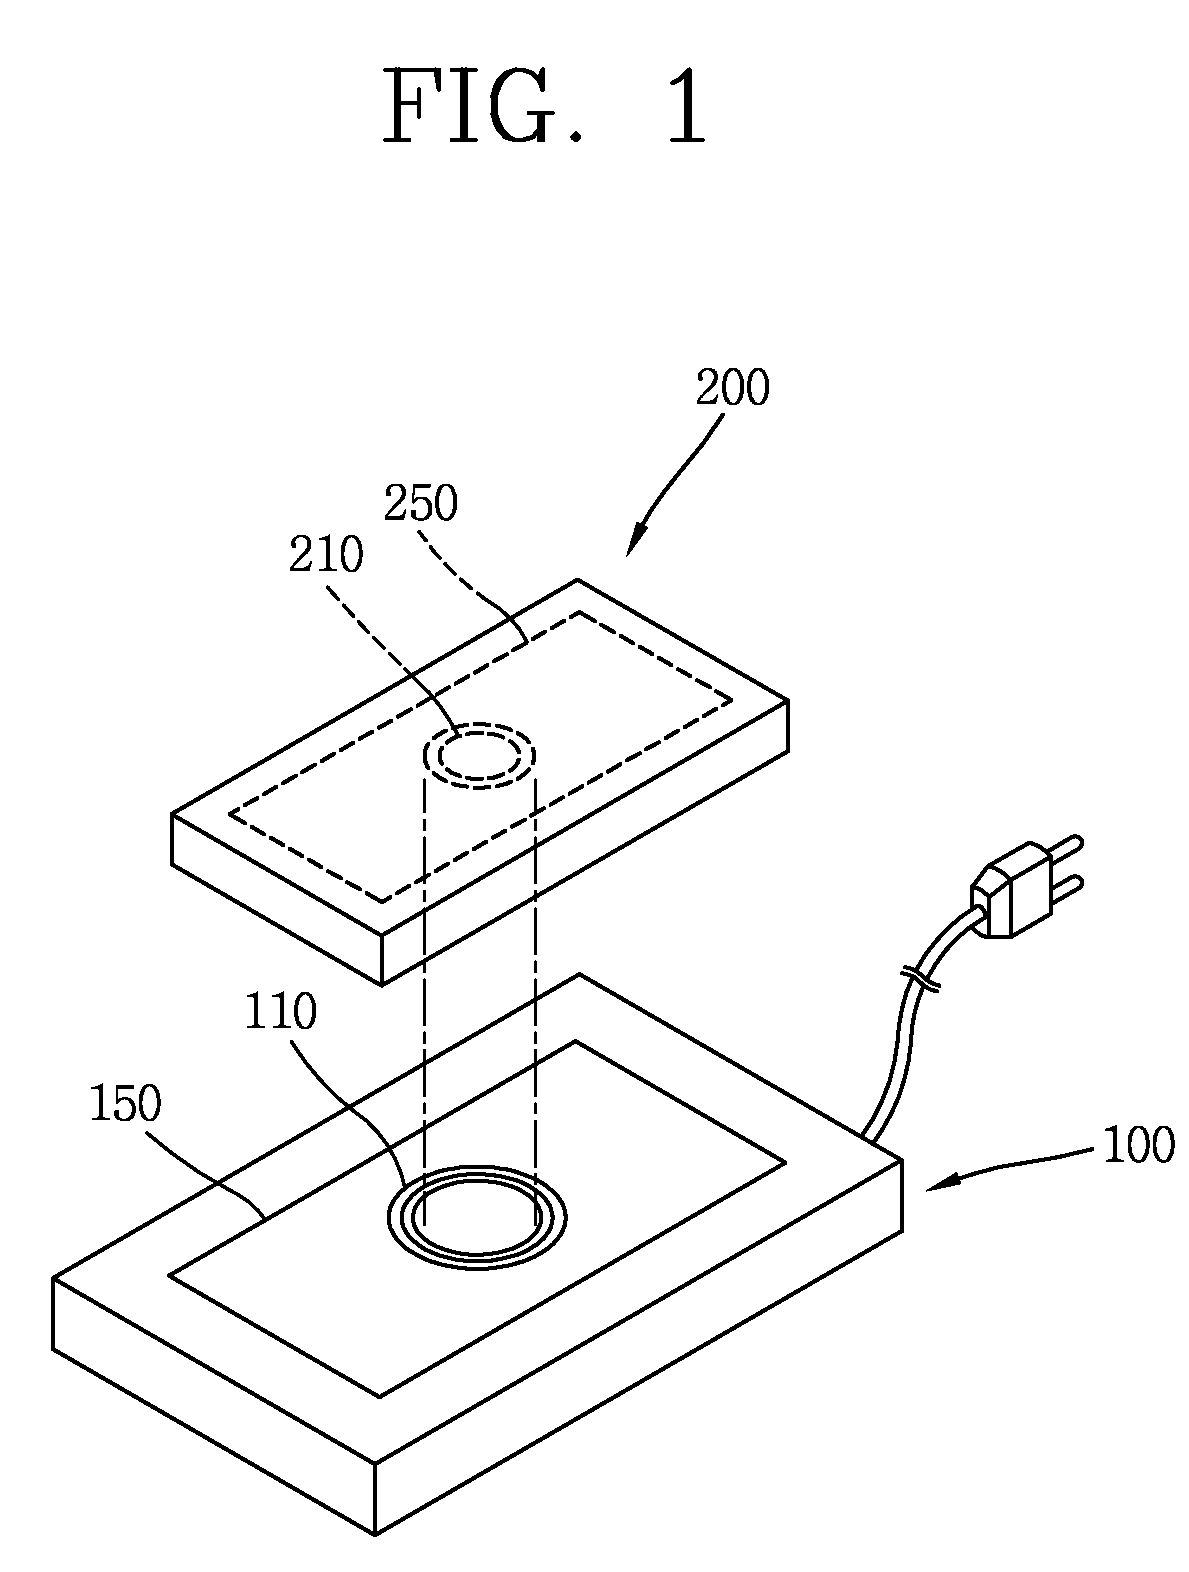 Wireless power transmission system, wireless power transmission apparatus and wireless power receiving apparatus therefor